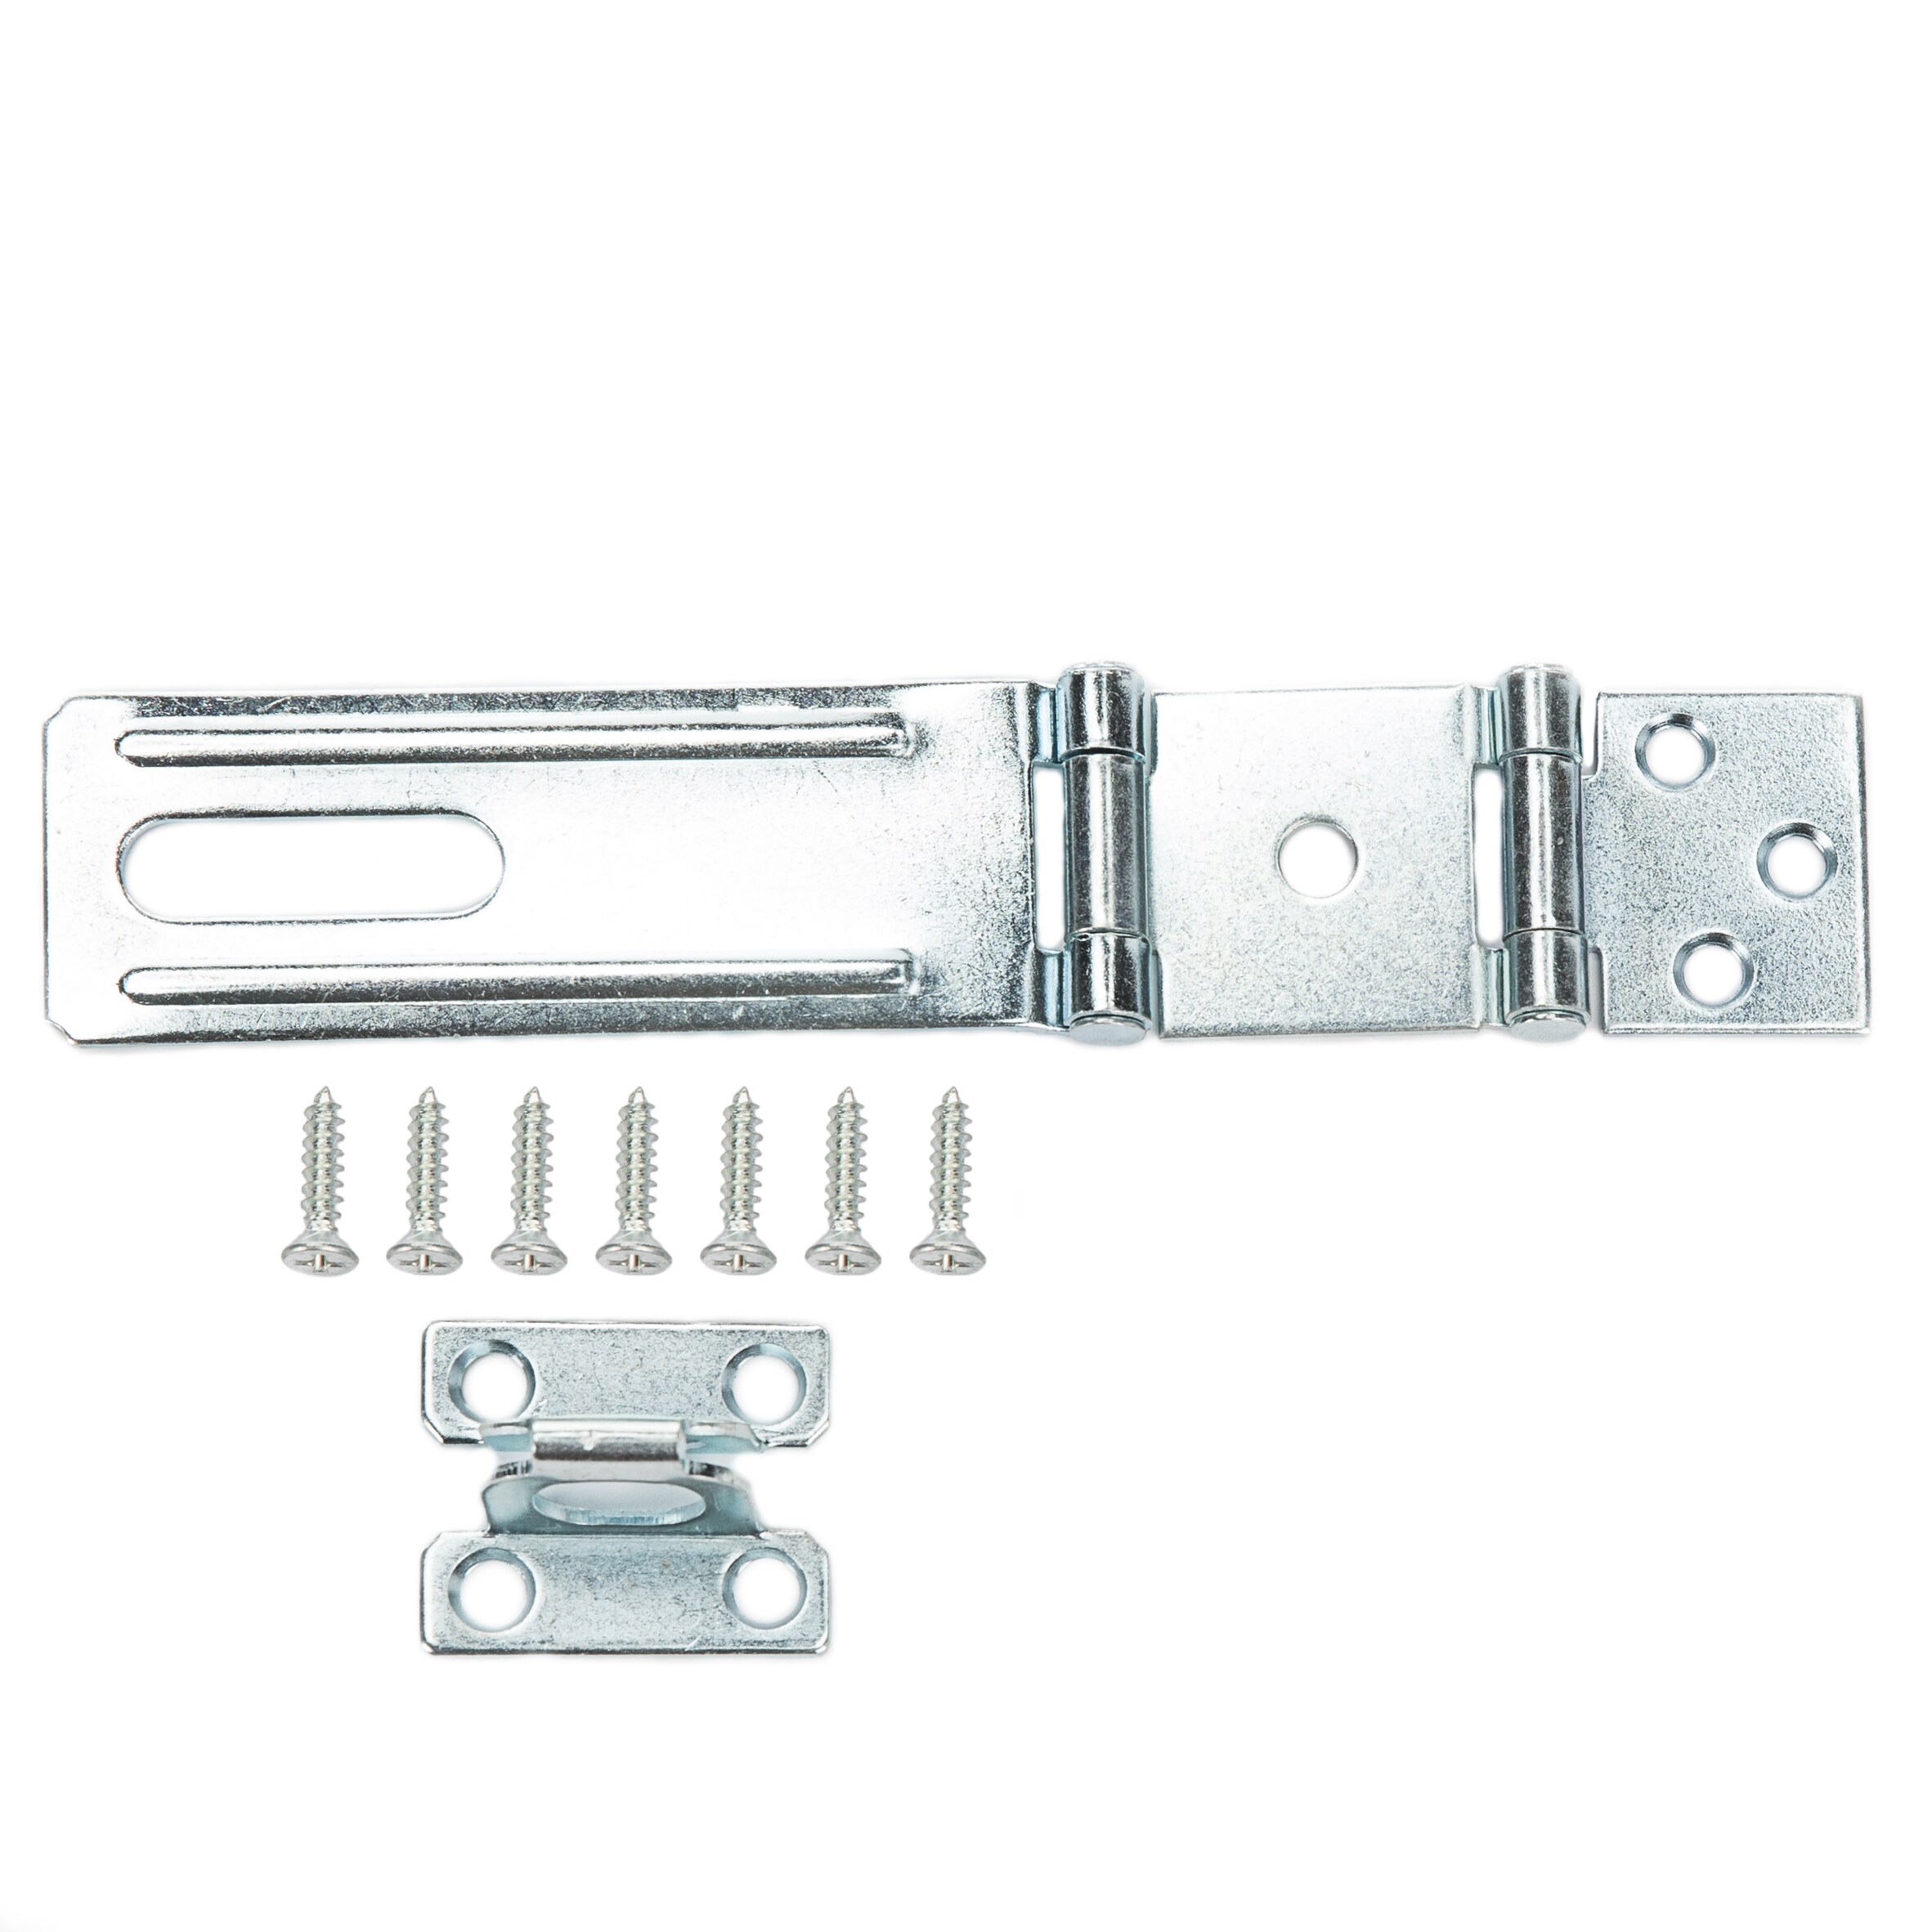 ZORO SELECT 4PE35 Safety Hasp,Steel,4-1/2 In L 